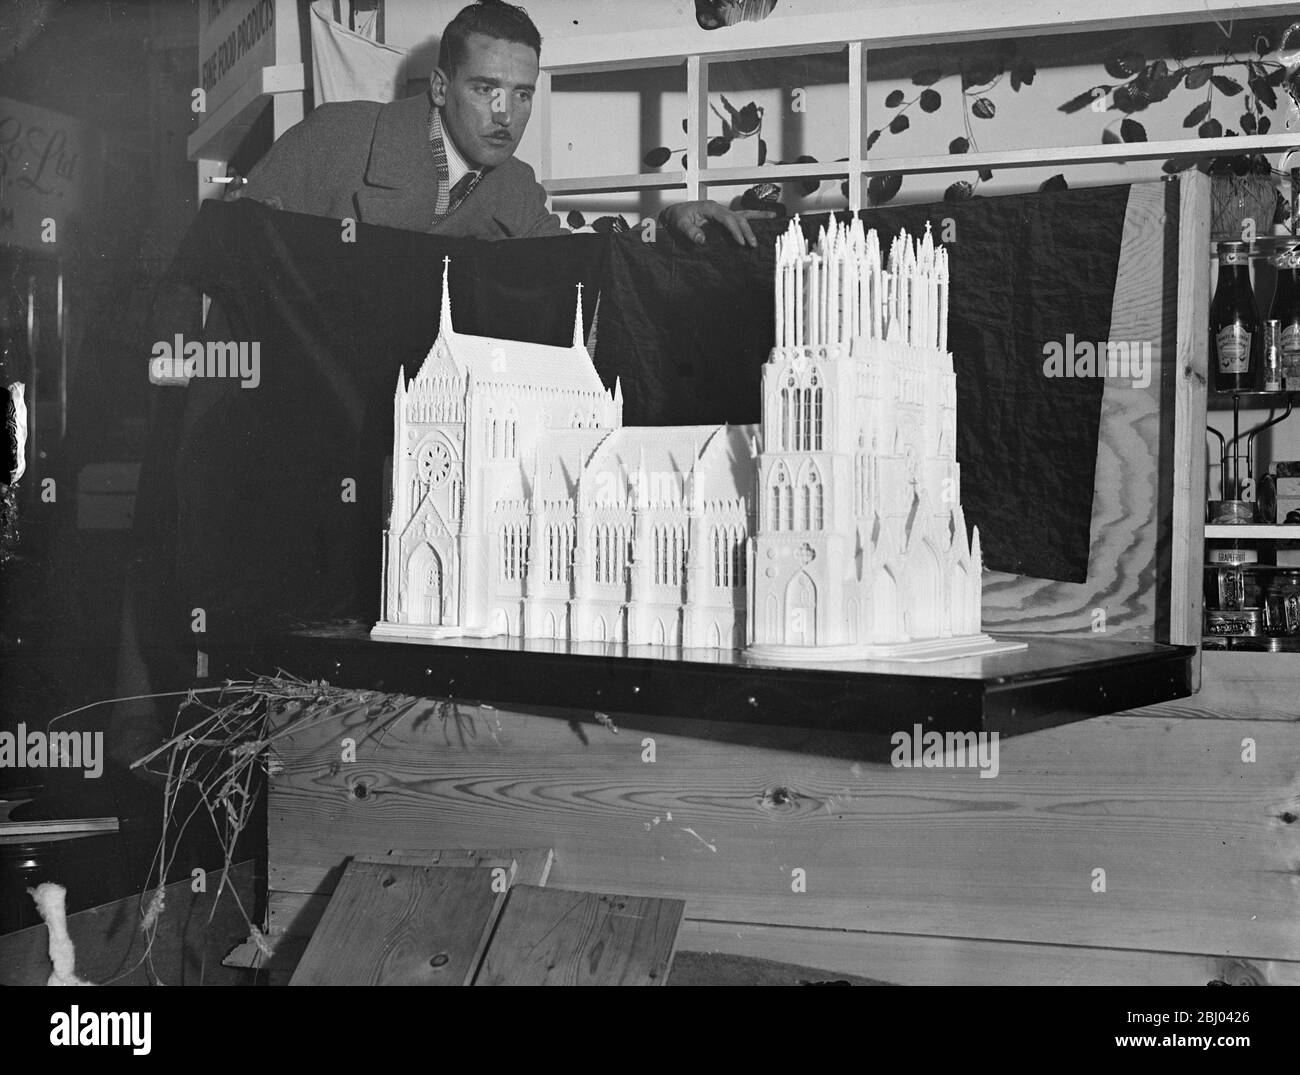 Rheims Cathedral in sugar. - Some wonderful models made entirely of sugar will be on show at the Hotel, Restaurant and Catering Exhibition, which opens in the National Hall at Olympia, London tomorrow, (Tuesday). Most of the models took many months to make. - Photo shows, Mr JJ Williams, head chef of the Royal Exeter Hotel, Bournemouth, with his sugar model of the restored Rheims Cathedral, which took him three months to make. - 29 November 1937 Stock Photo